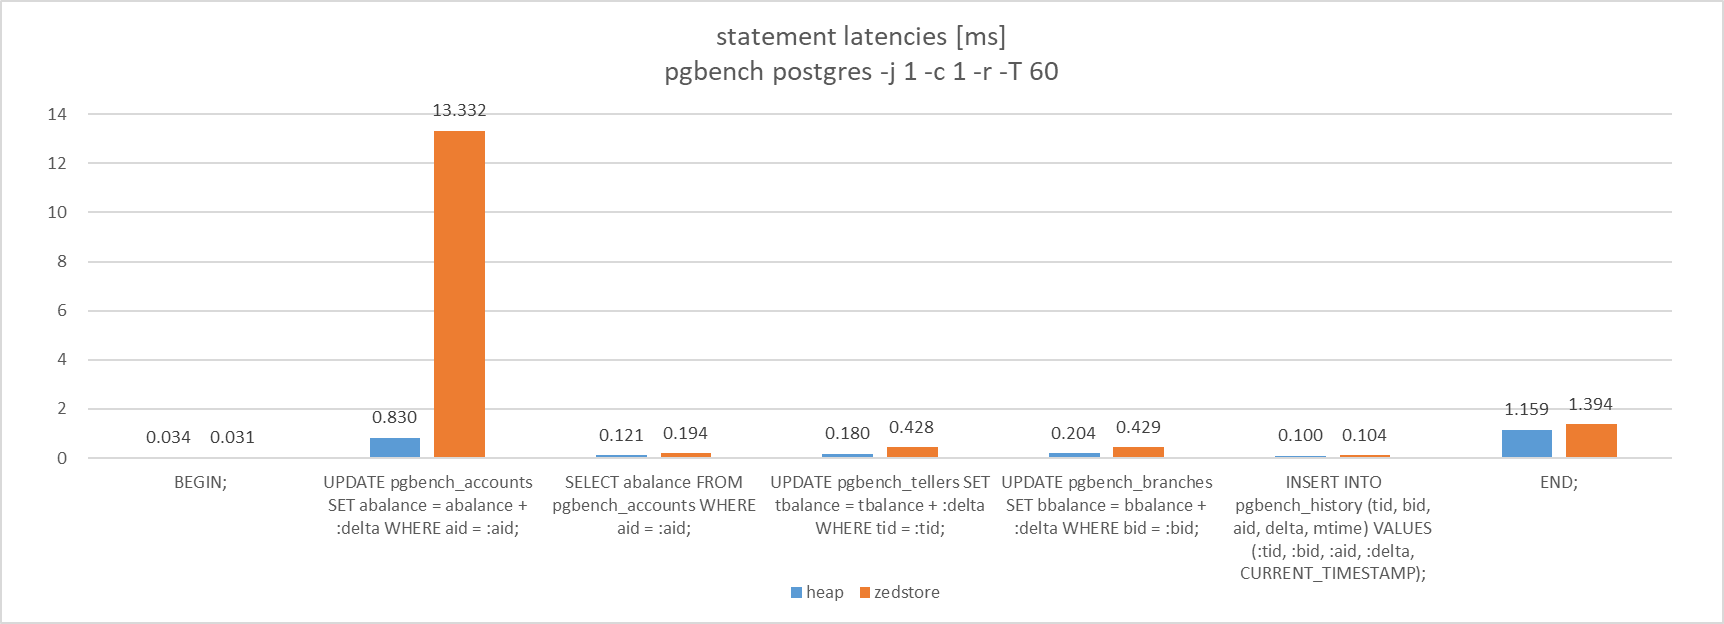 _images/zedstore_pgbench_latency.png